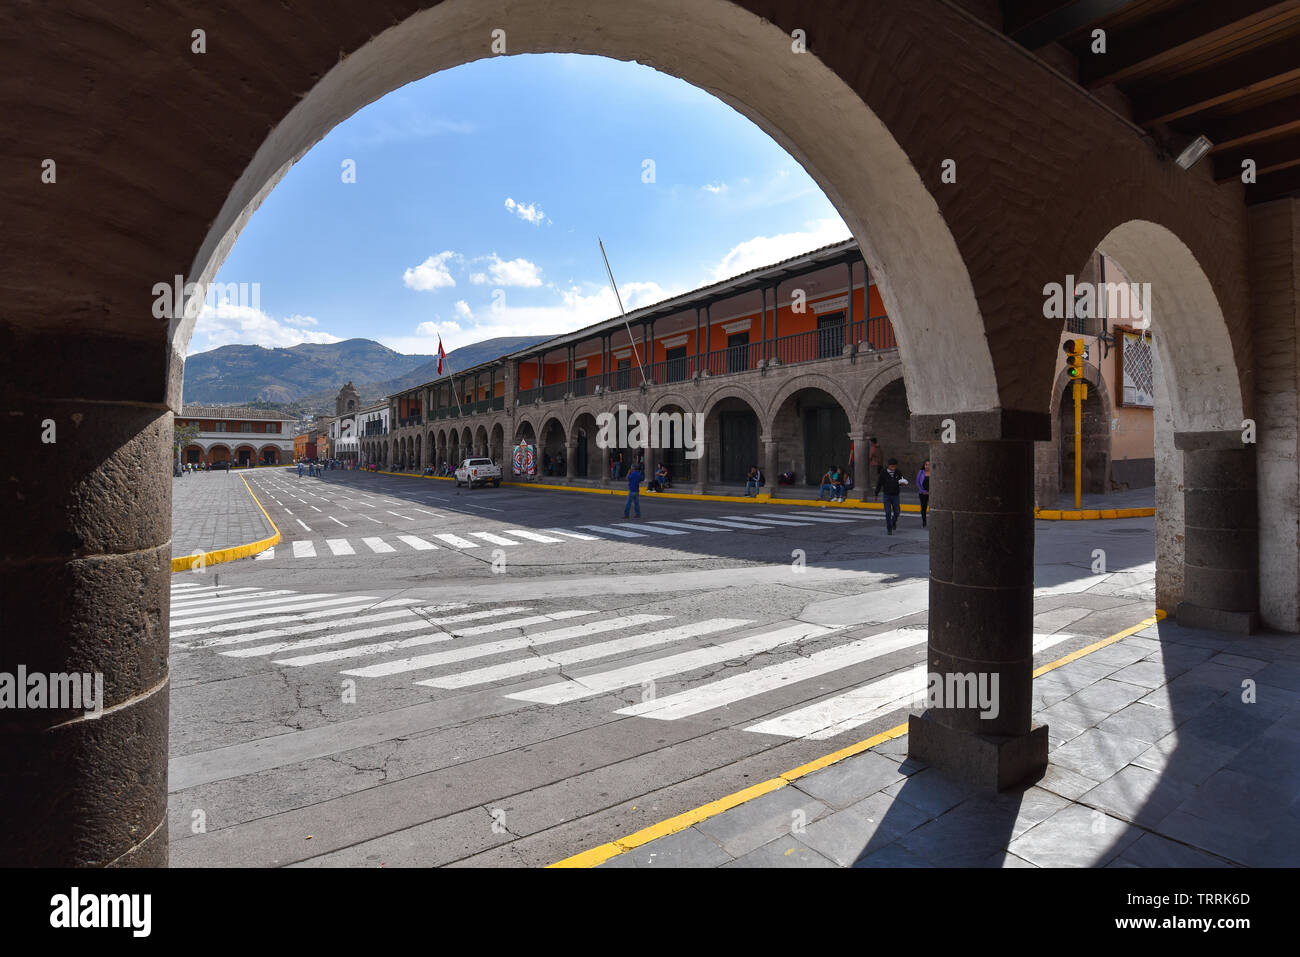 Colonial buildings and arched passageways surrounding the Plaza de Armas, Ayacucho, Peru Stock Photo